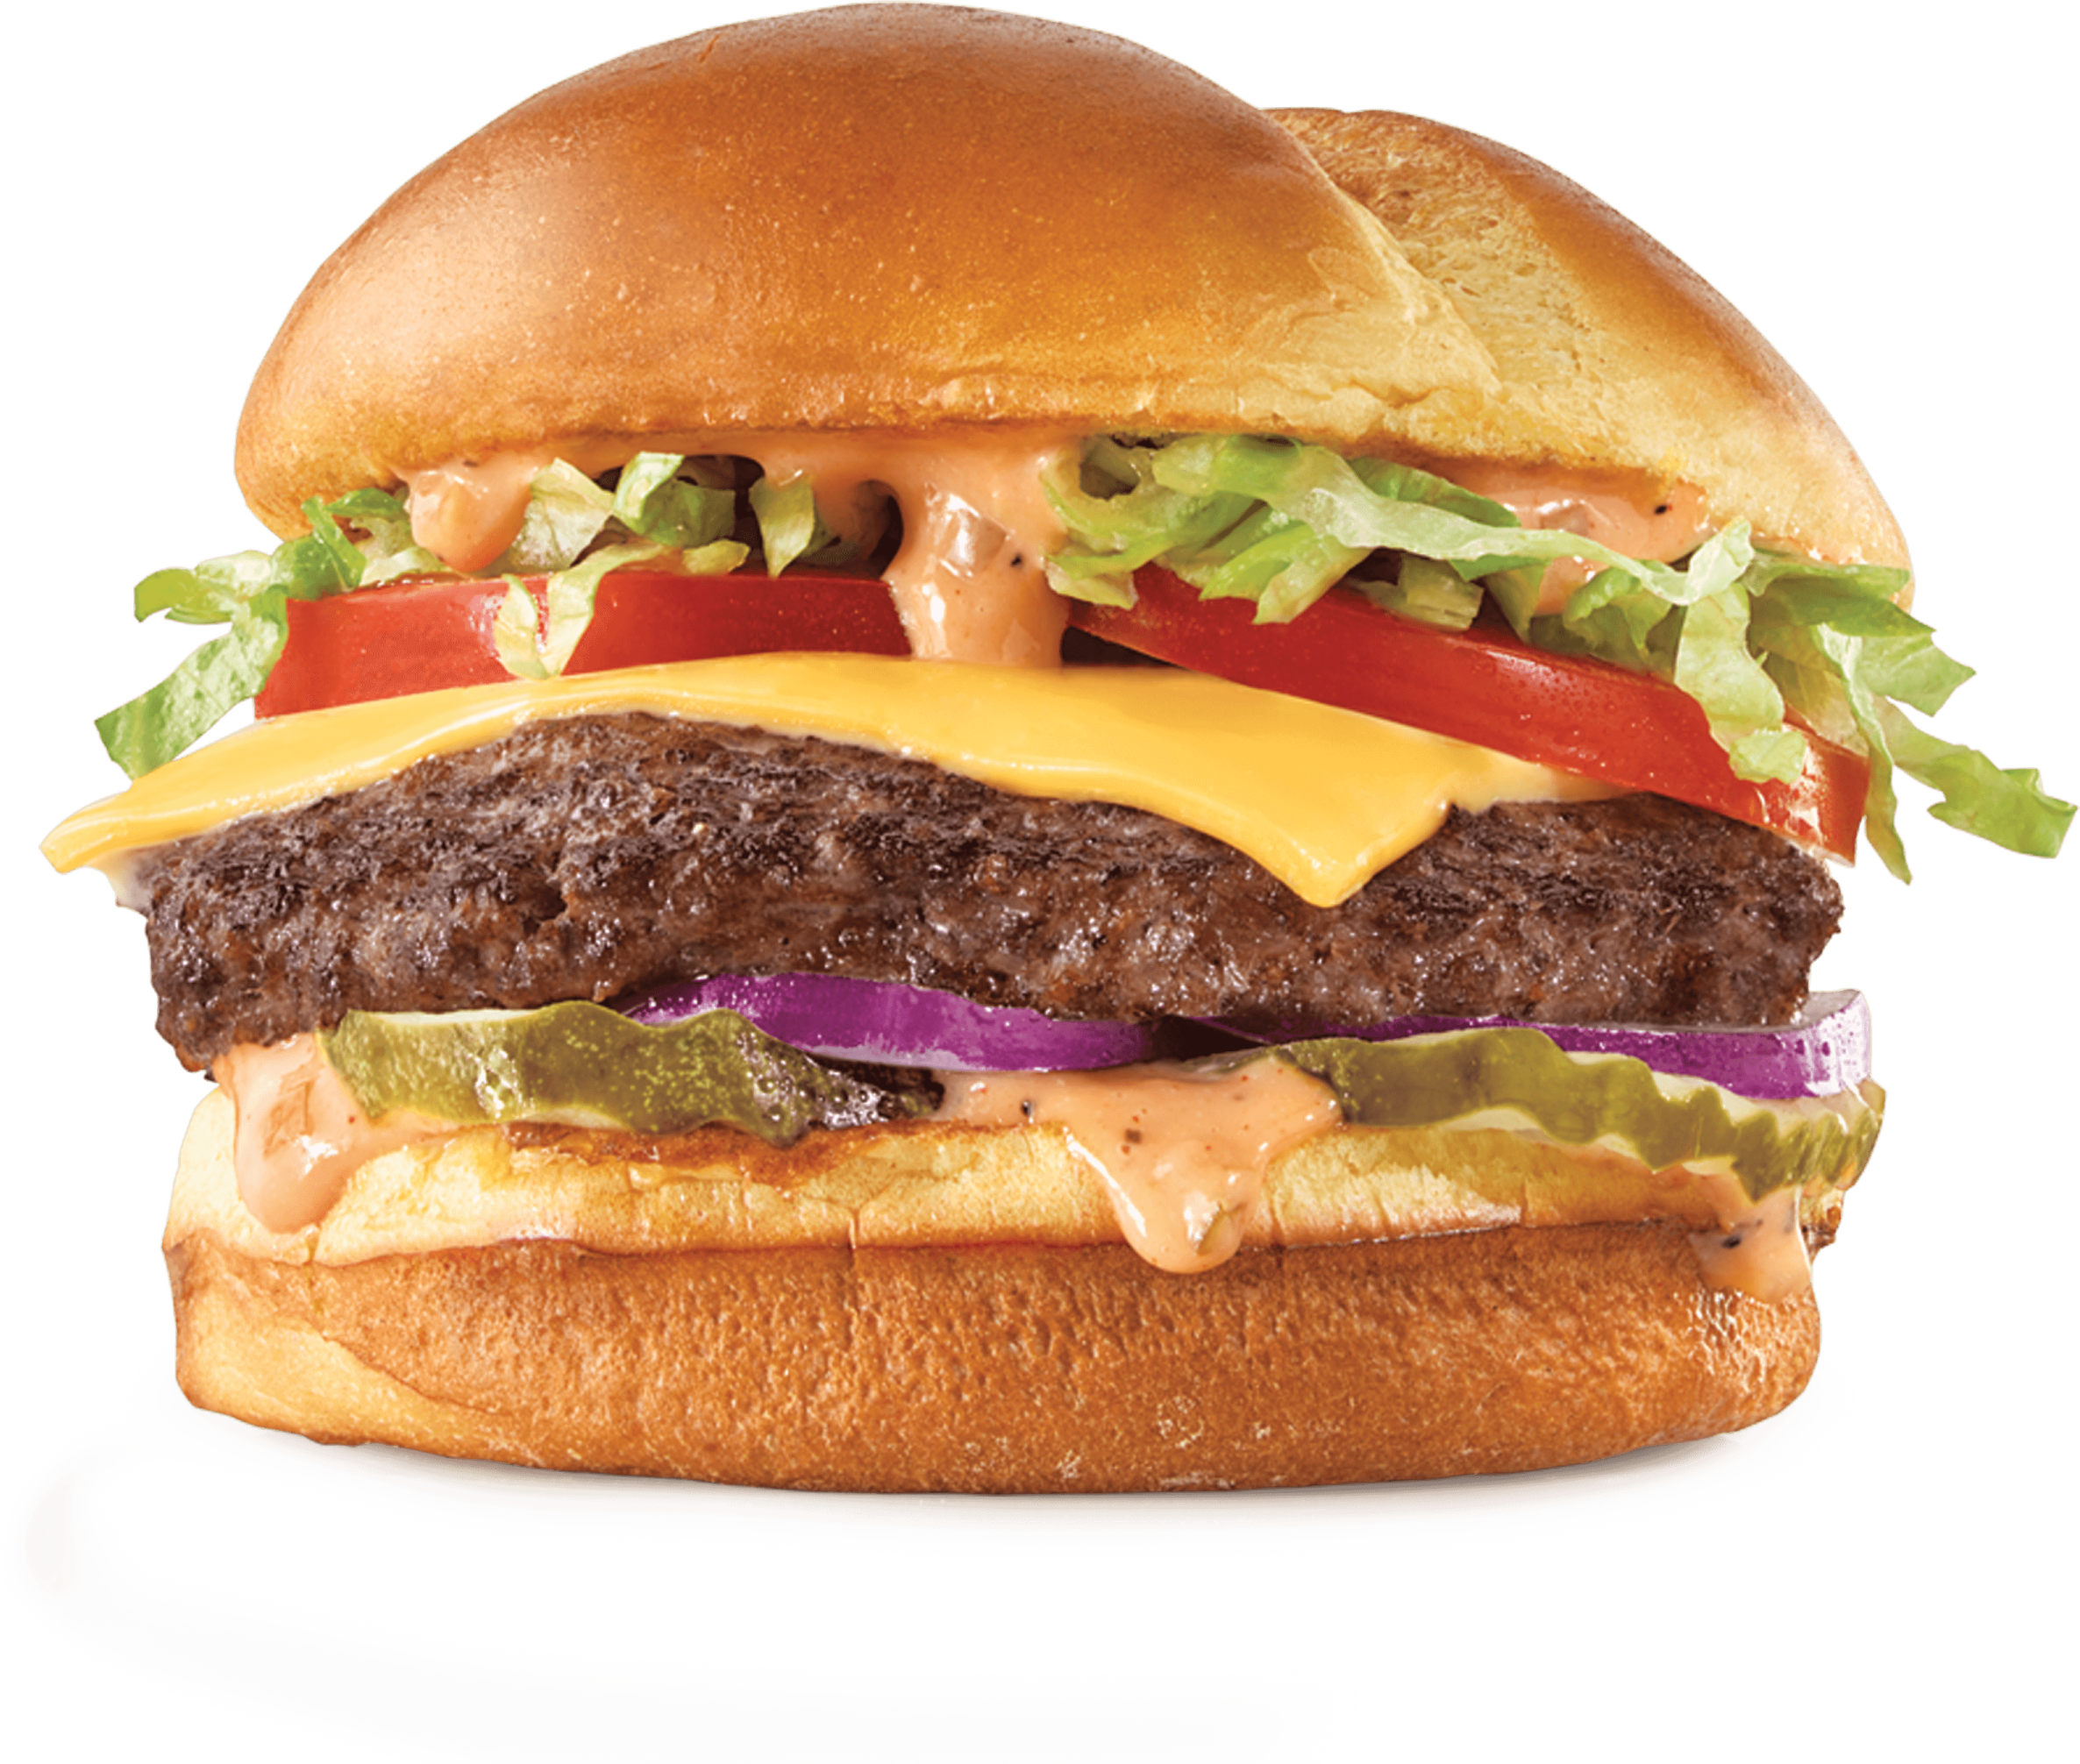 Arby's Deluxe Wagyu Steakhouse Burger Nutrition Facts